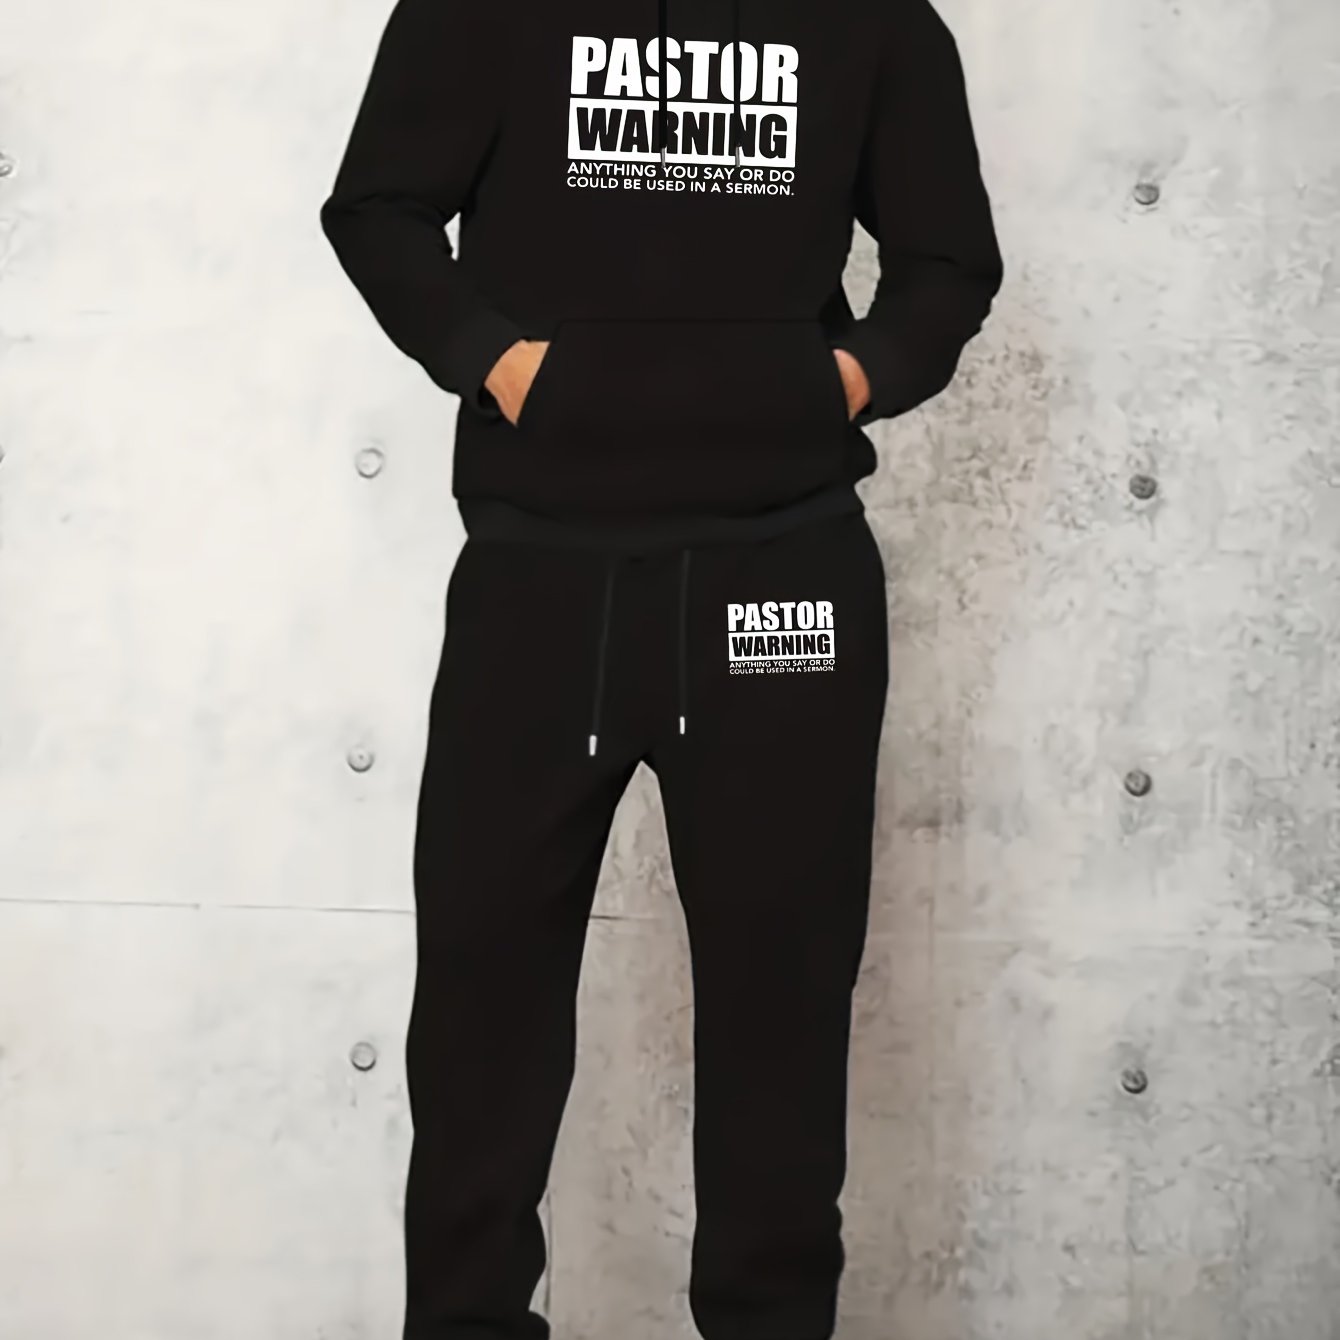 PASTOR WARNING: Anything You Say Or Do May Be Used In A Sermon Men's Christian Casual Outfit claimedbygoddesigns